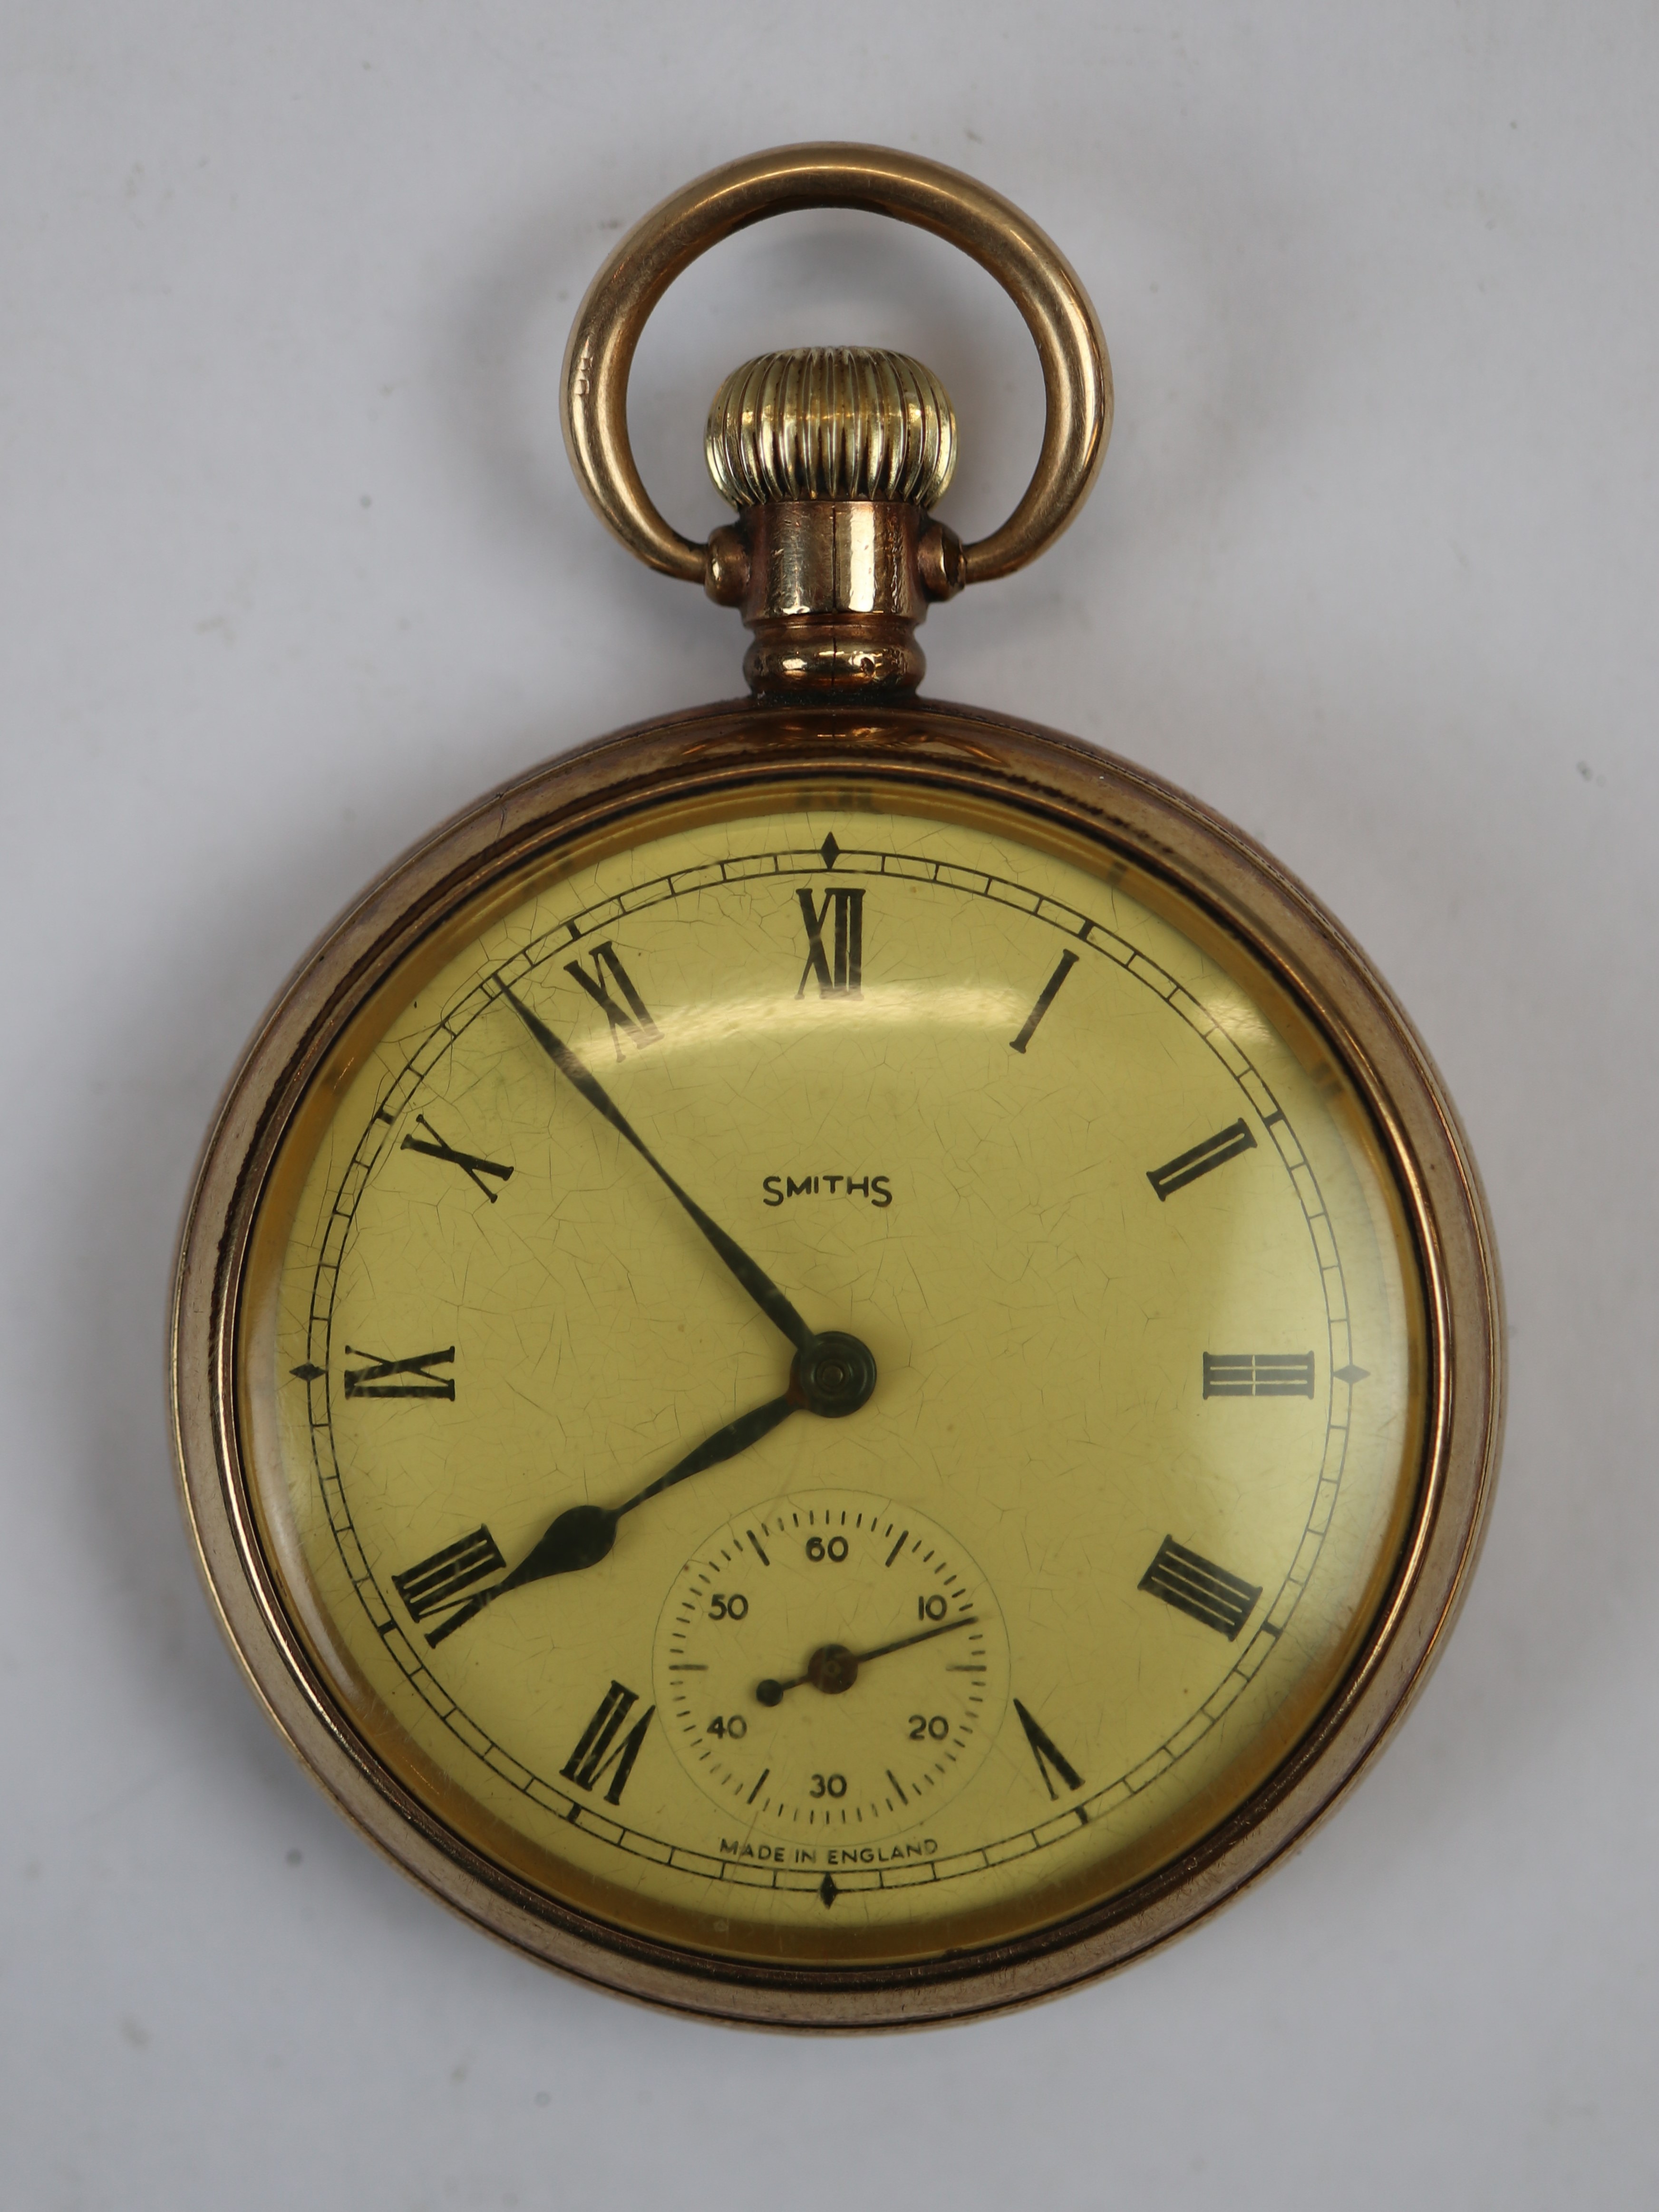 Smiths working pocket watch together Rockford pocket watch - Image 5 of 5